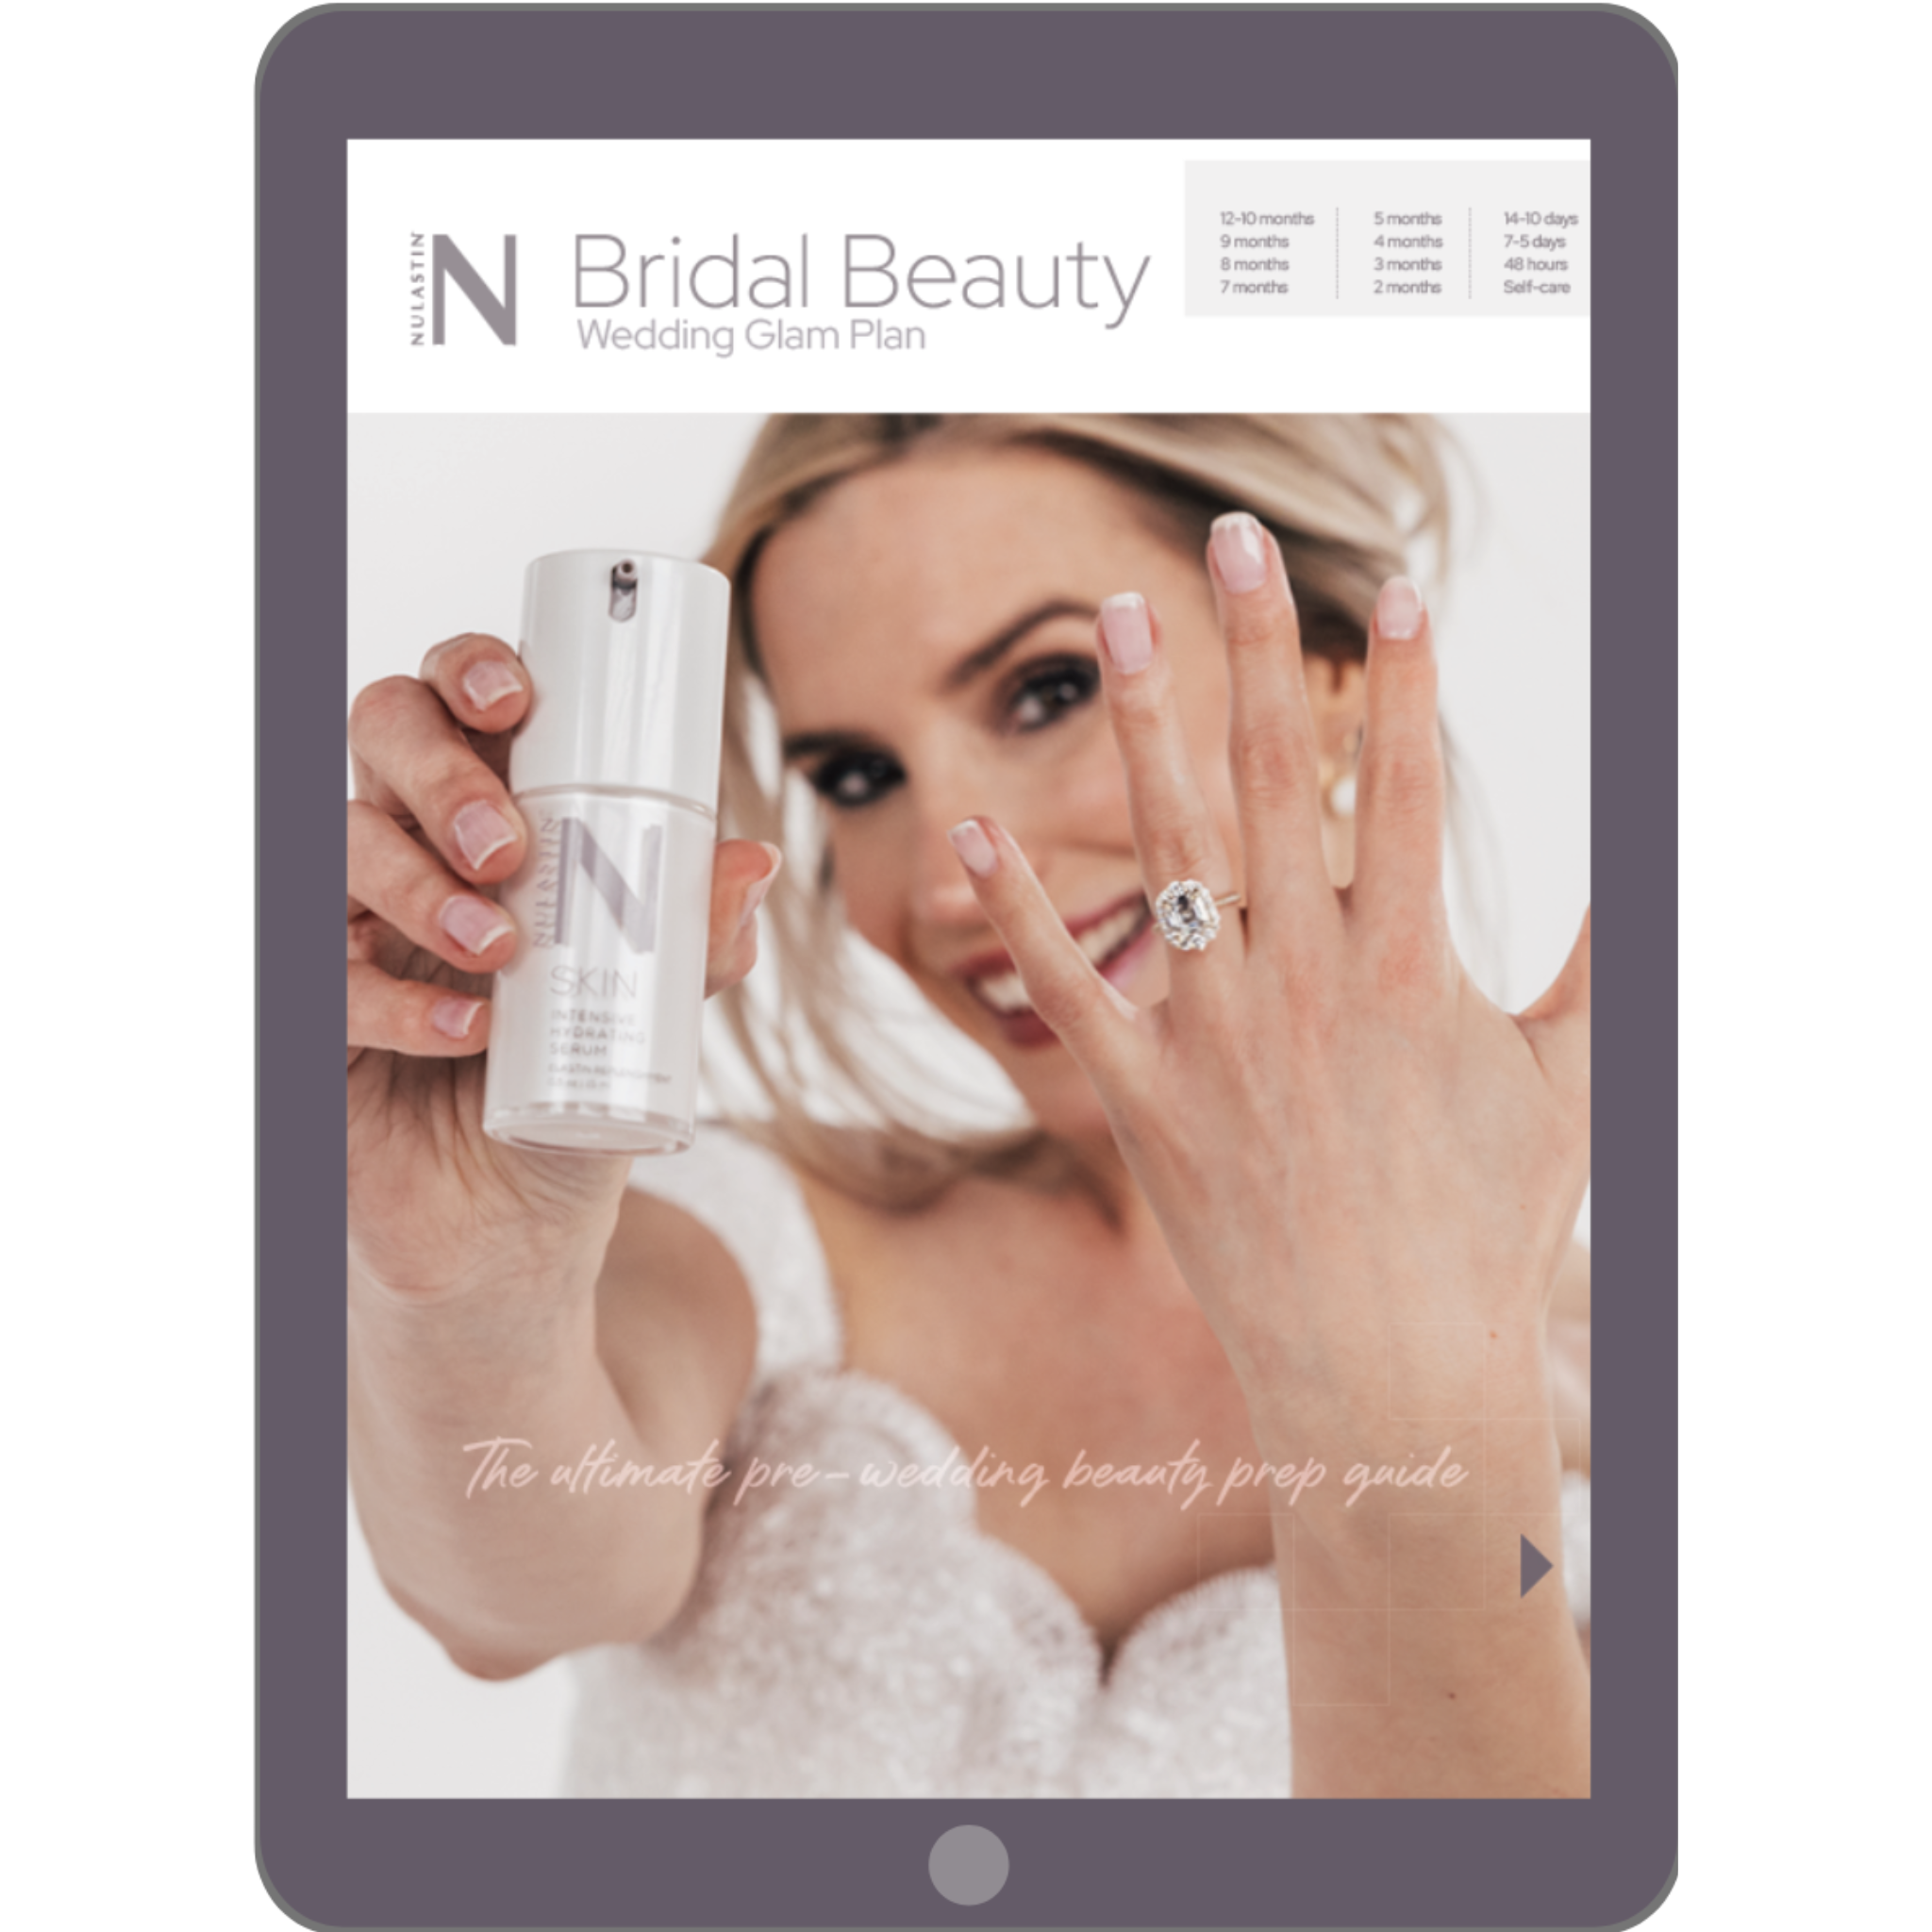 E-Book: Bridal Beauty Wedding Glam Plan (Emailed After Purchase)